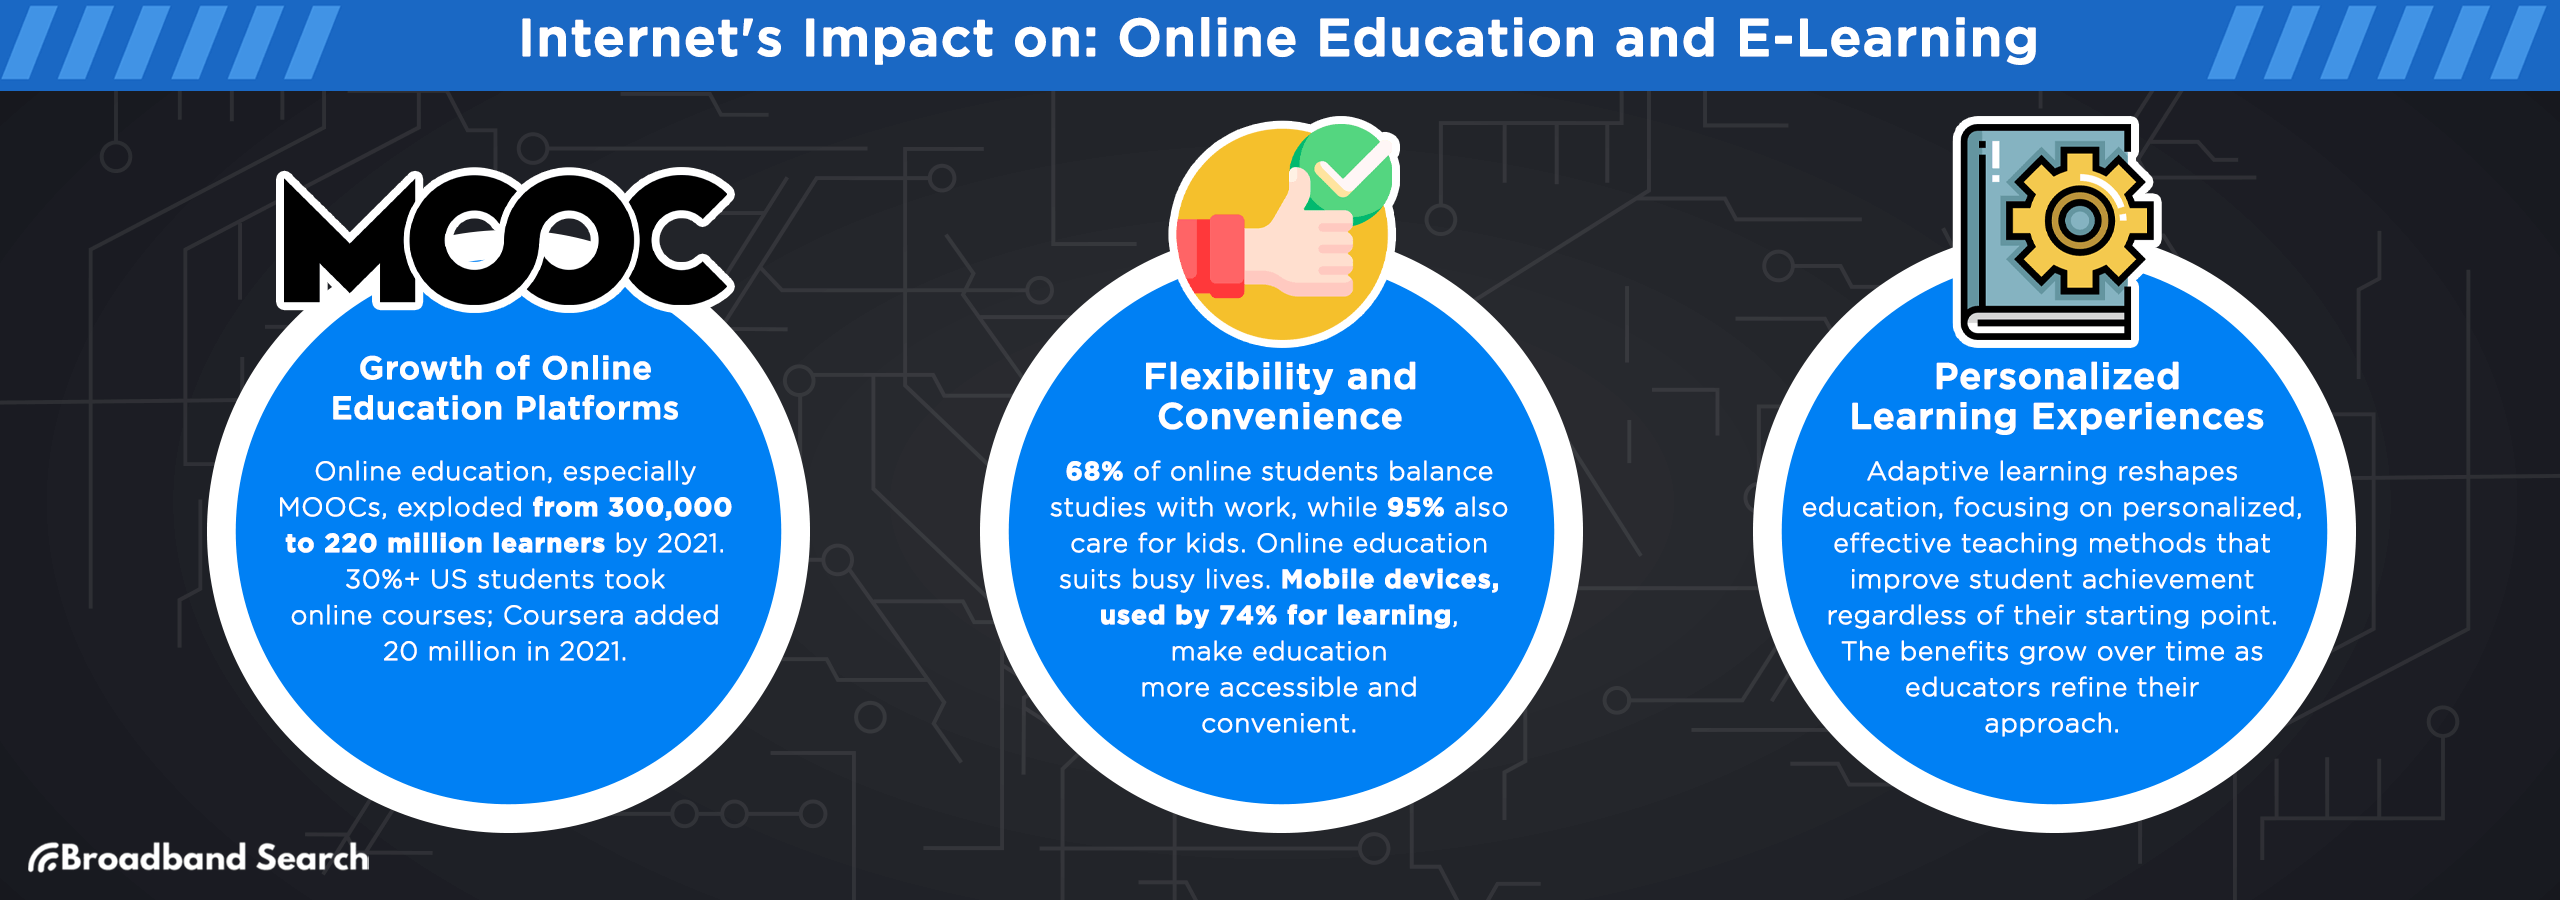 Internet's impact on online education and e-learning